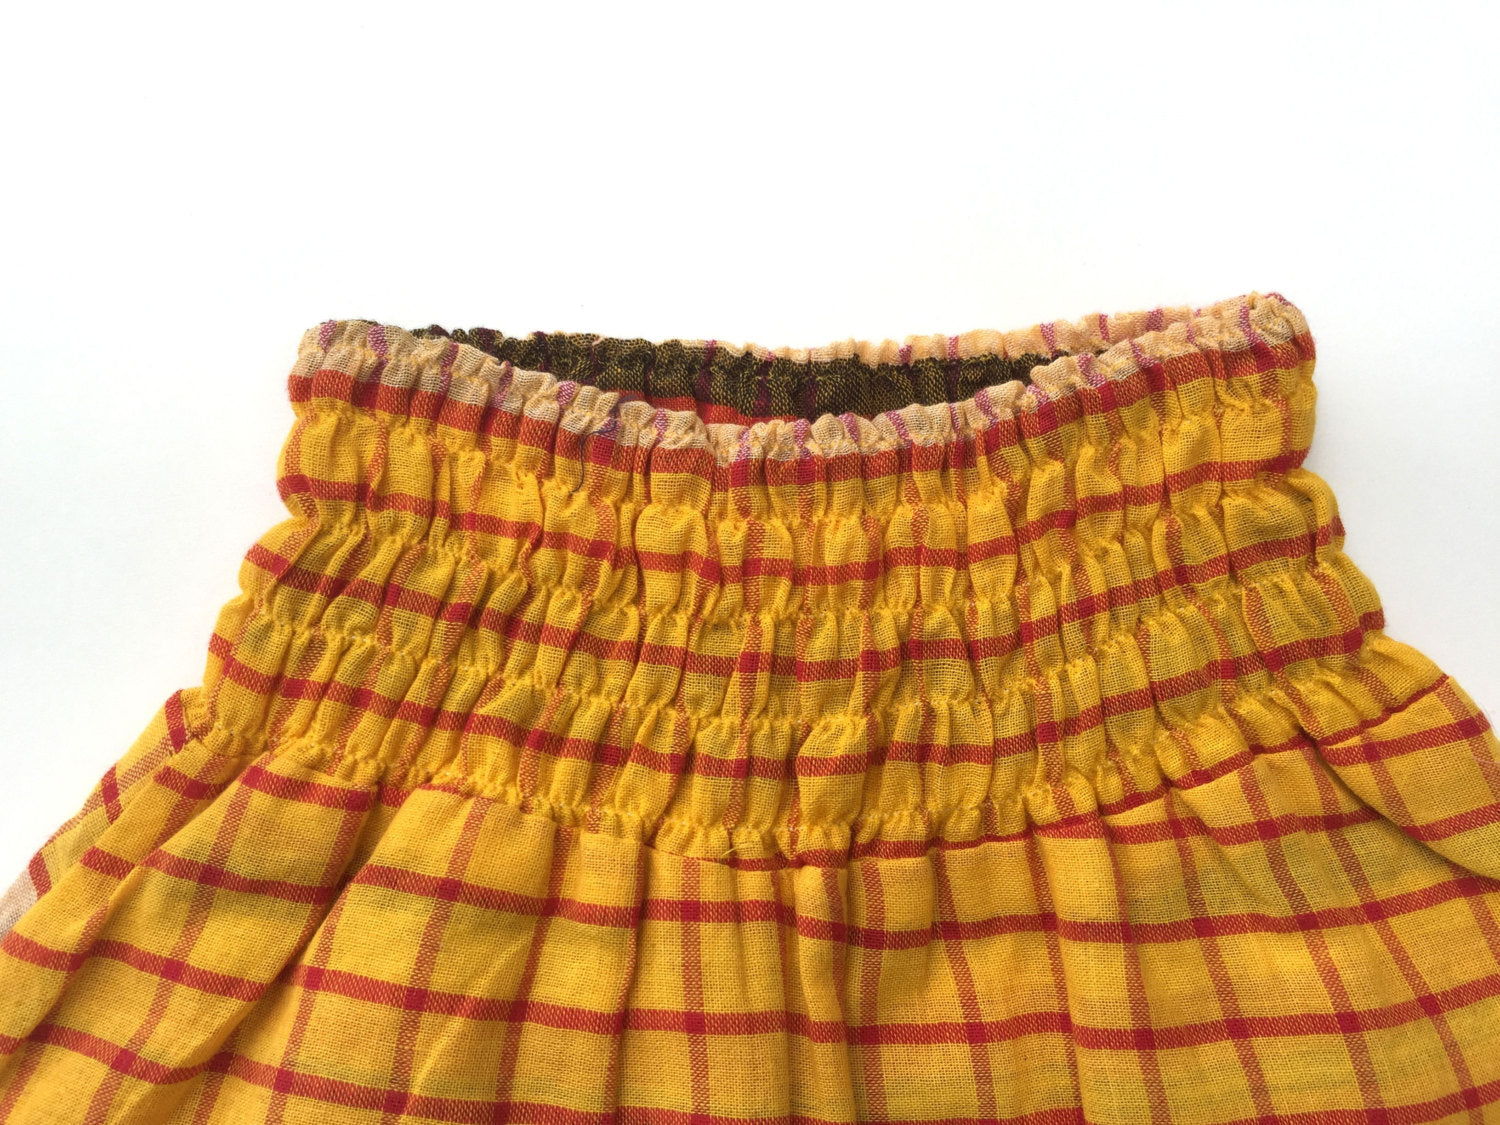 cotton check harem play trousers